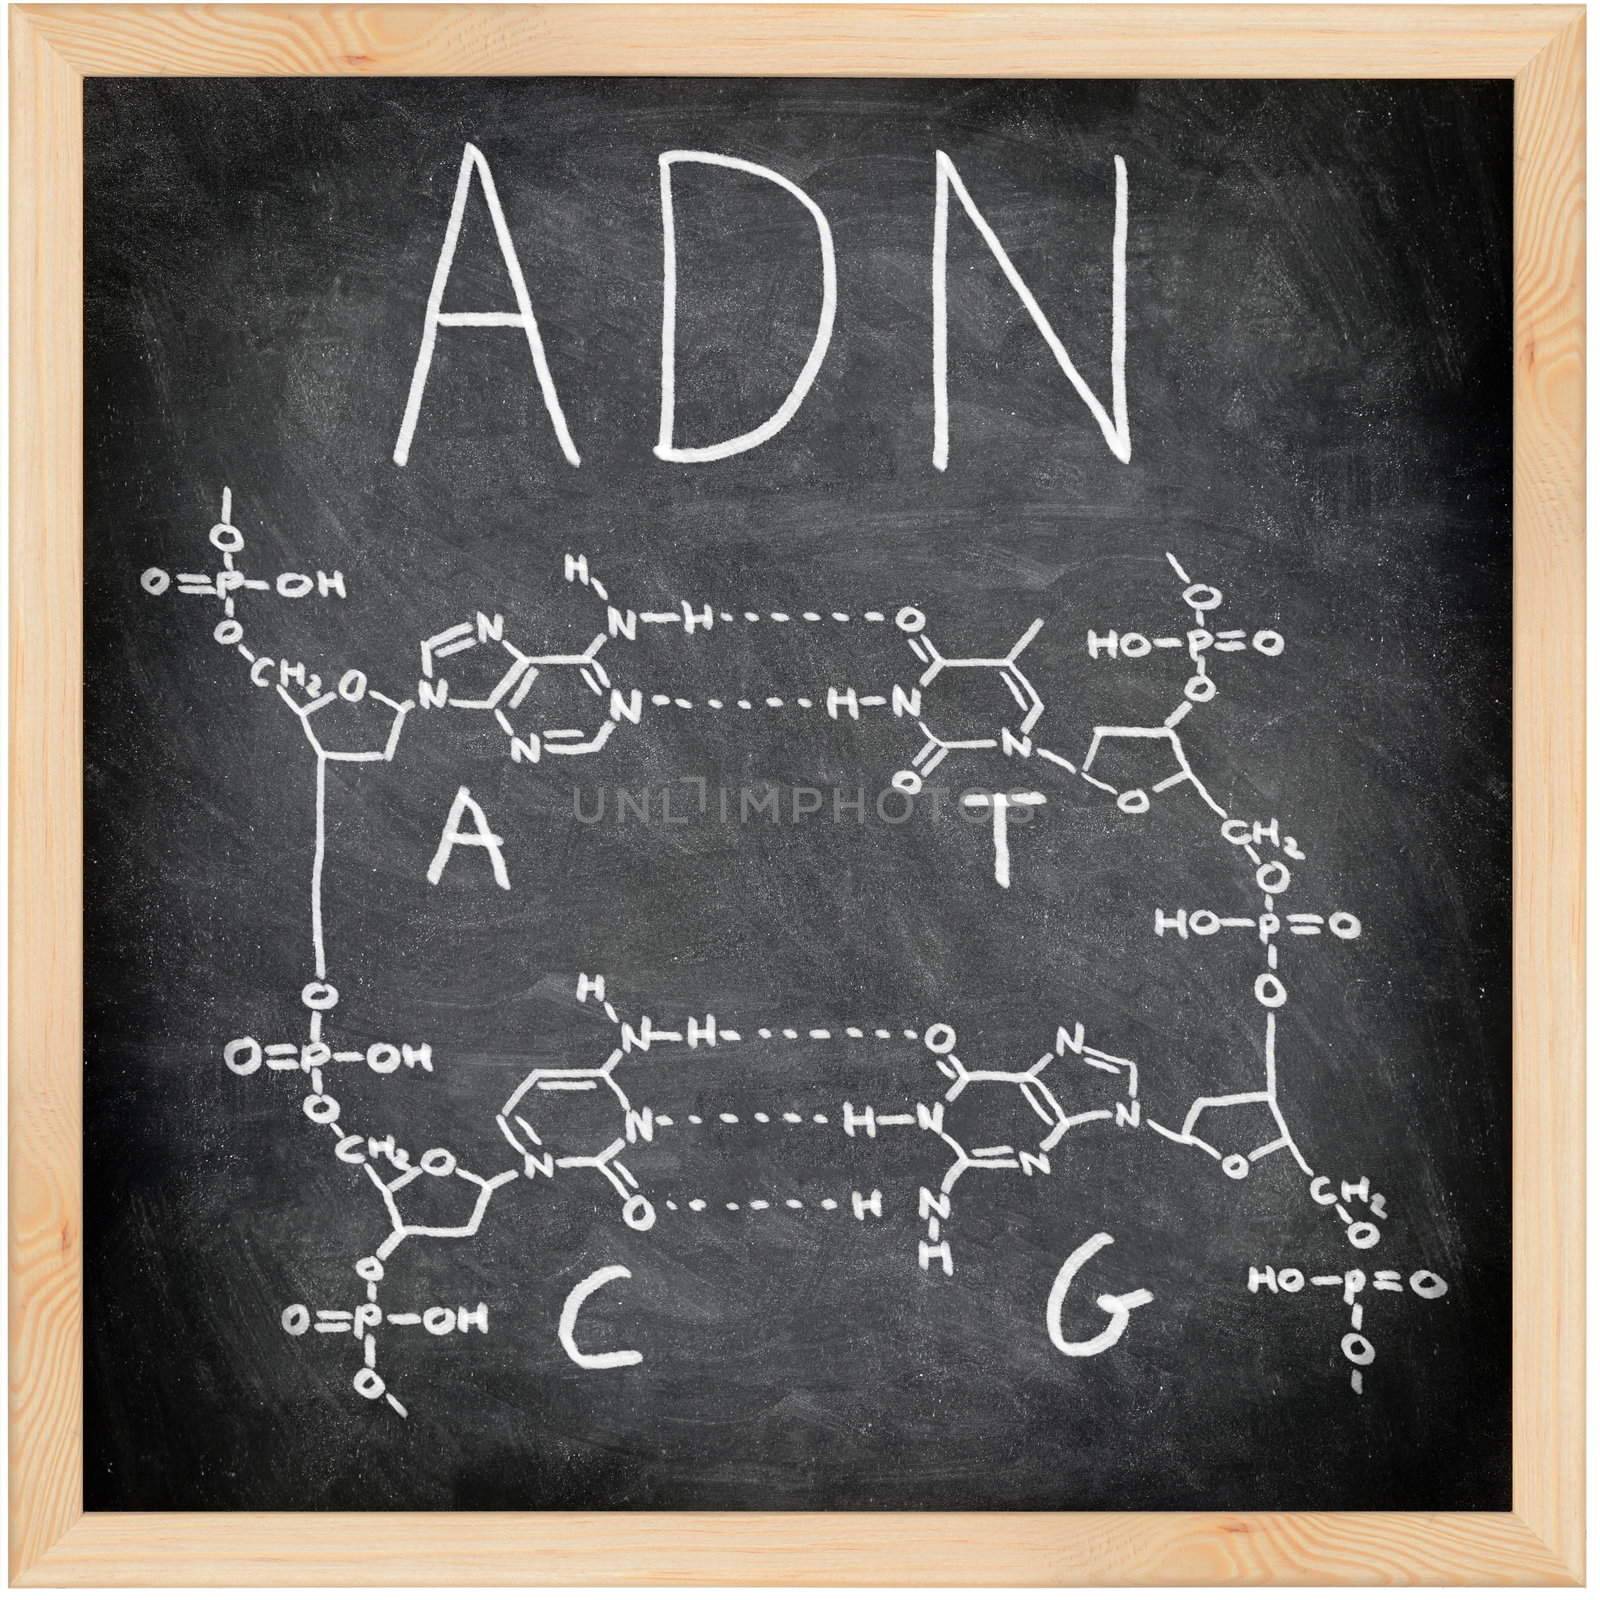 ADN, DNA in Spanish, French and Portuguese written on blackboard with chalk. Chemical structure of DNA including all four bases. Chalkboard science and education concept.